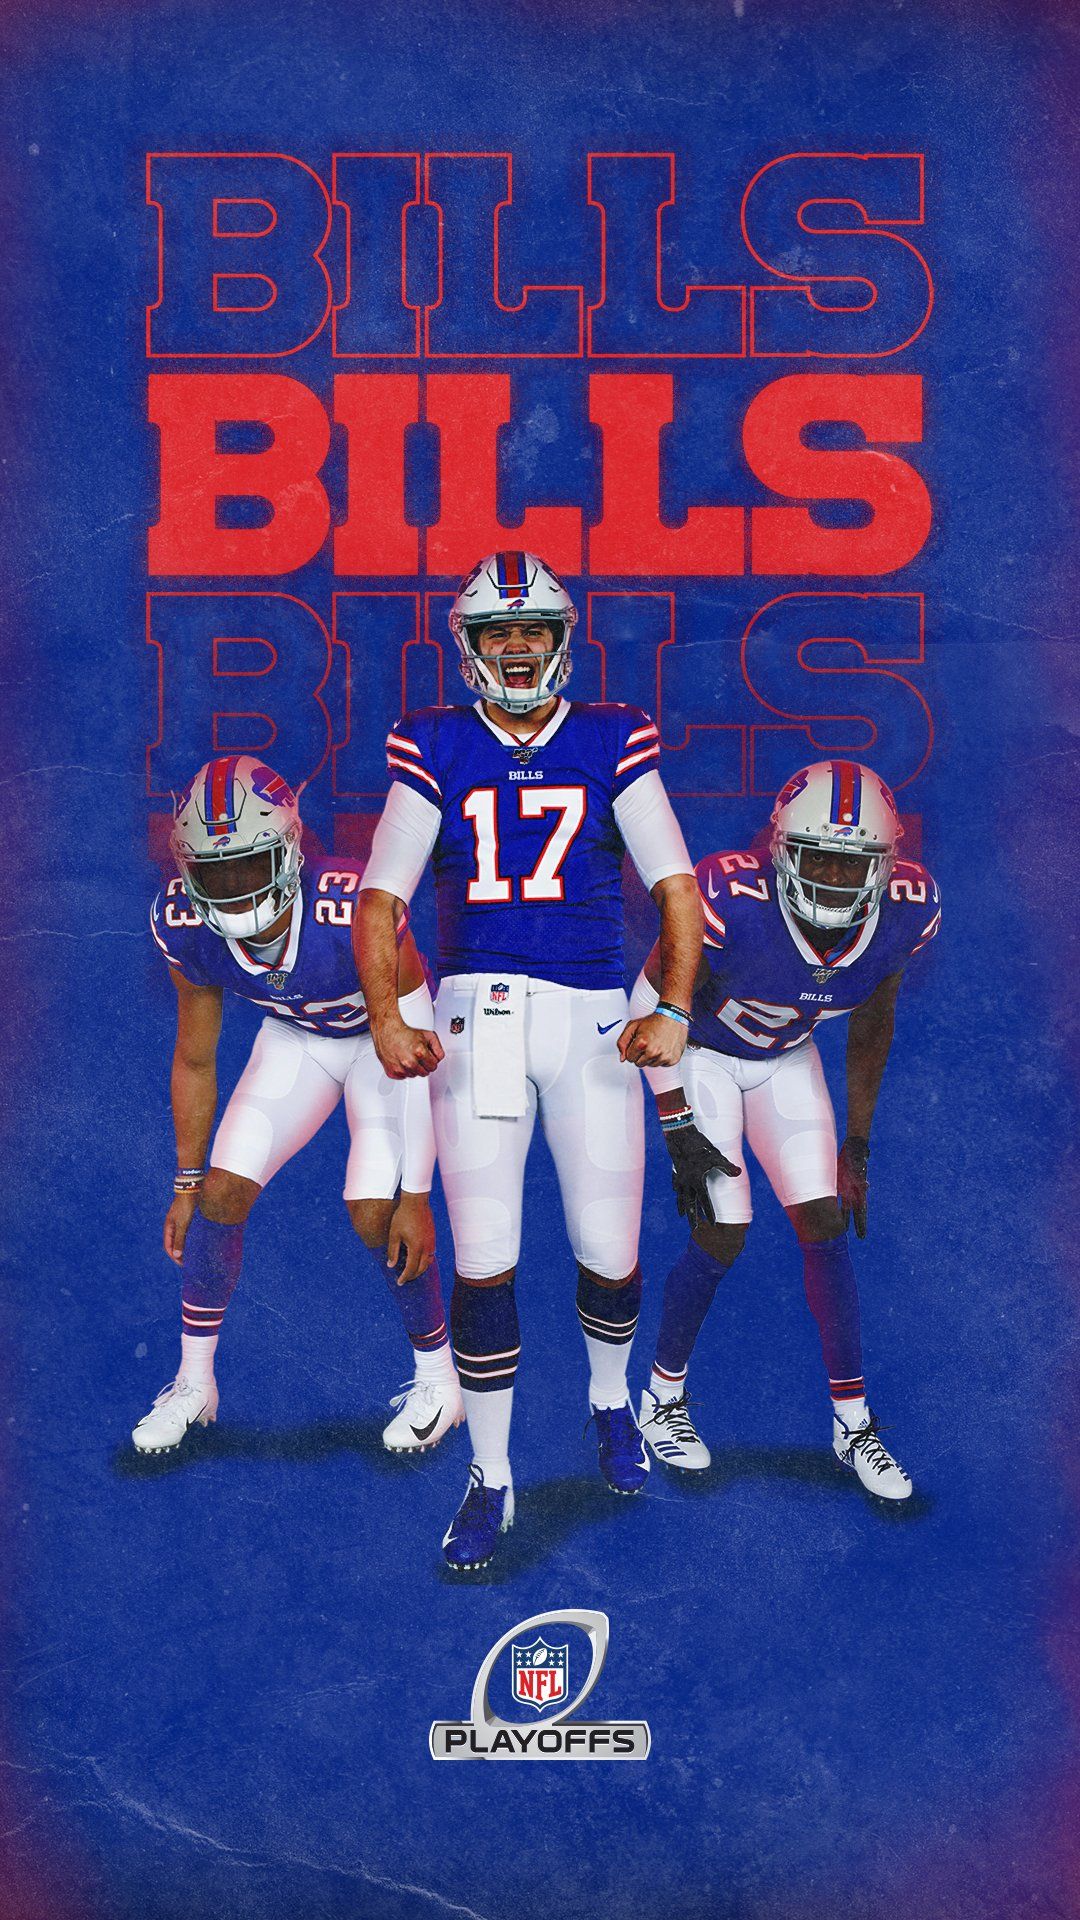 The NFL just posted this sweet Bills wallpaper on their Twitter